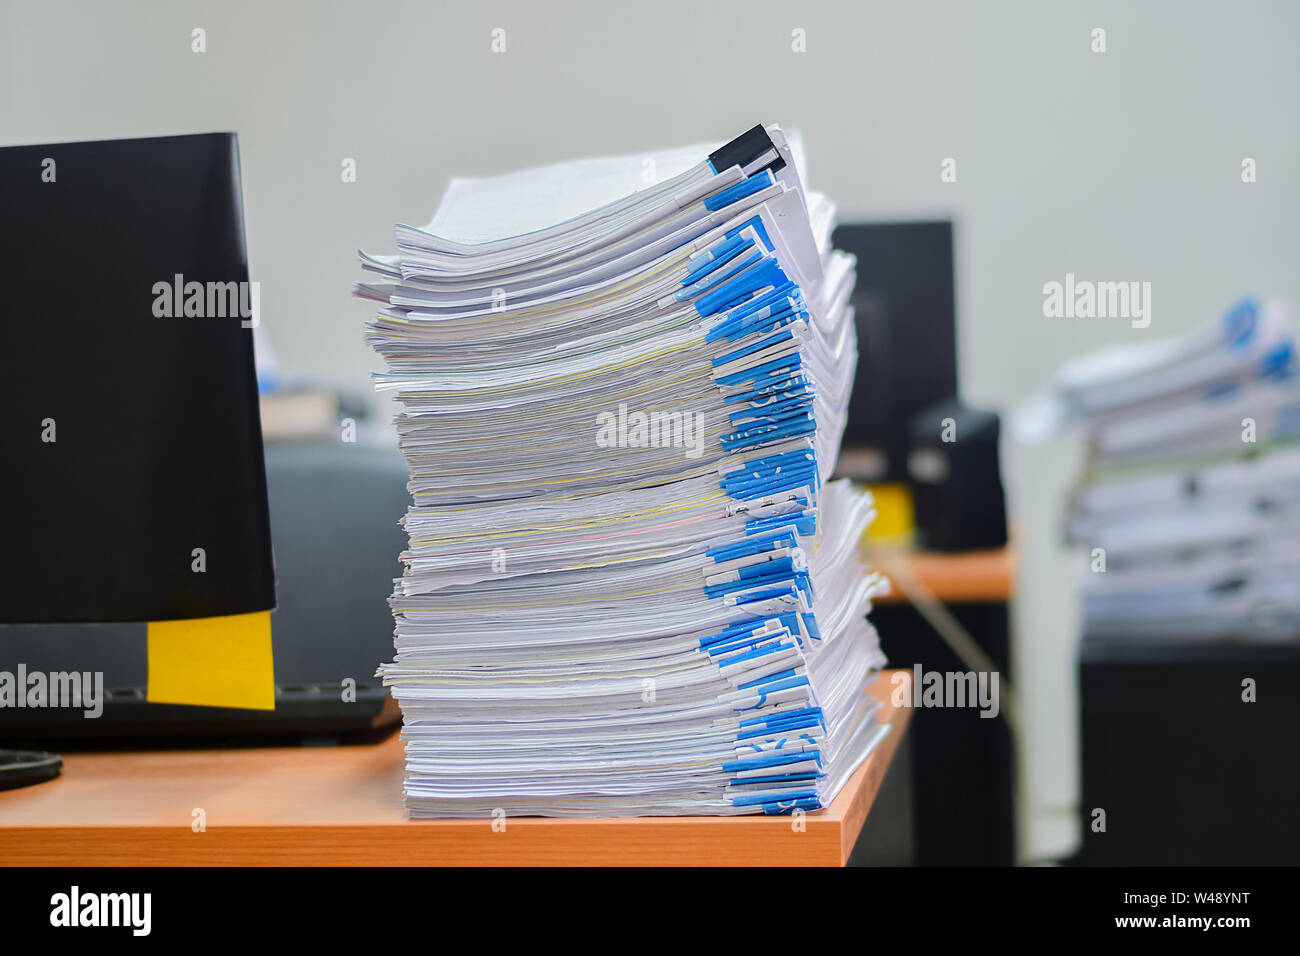 Pile Of Paper Documents In The Office Stock Photo - Download Image